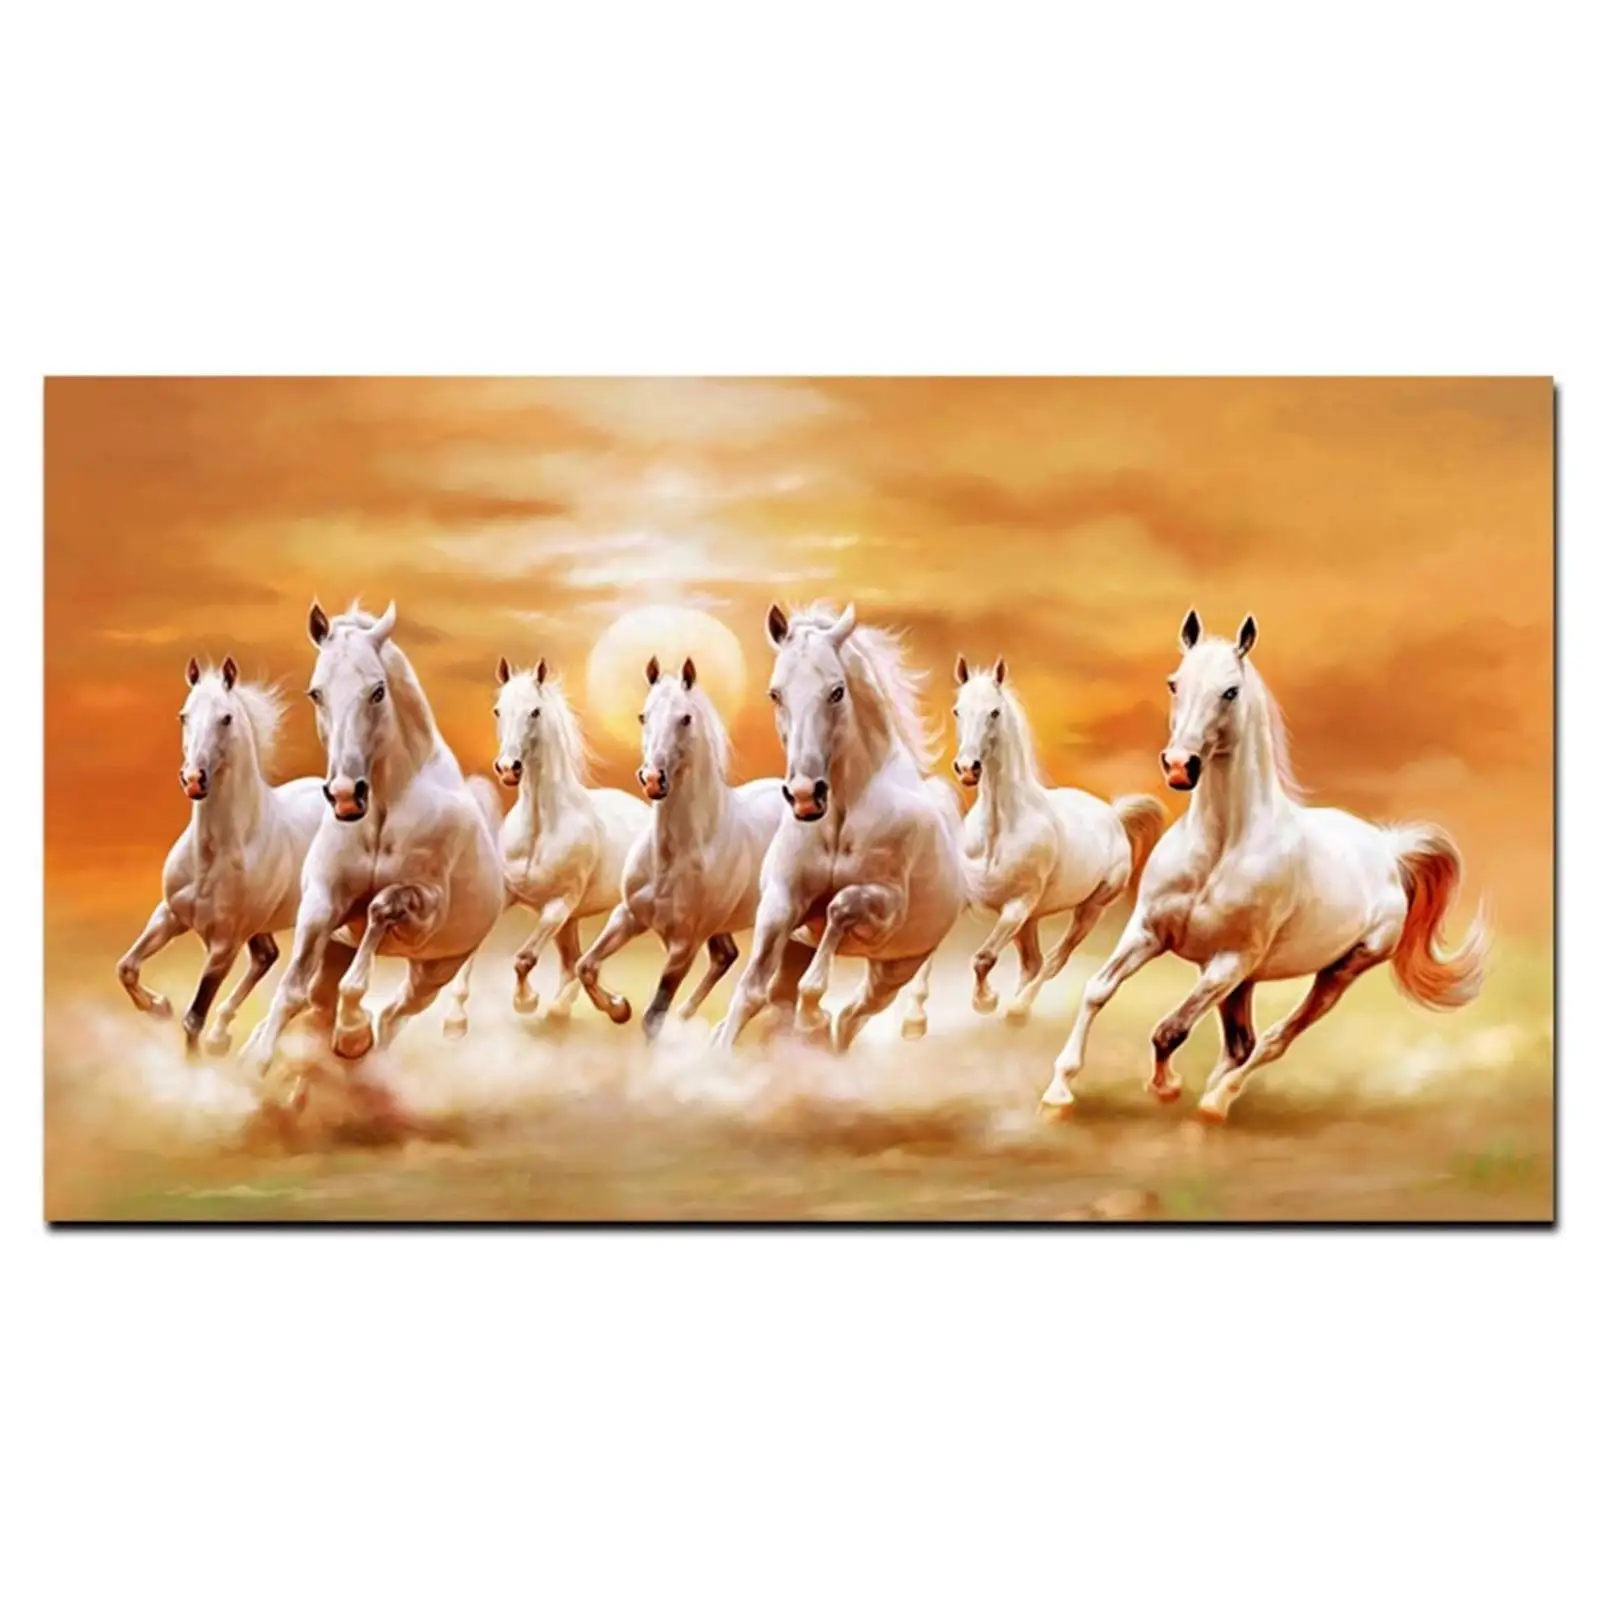 

Modern Scenery Running White Horse Oil Painting On Canvas Poster Print Wall Art Mural Picture For Home Bedroom Living Room Decor